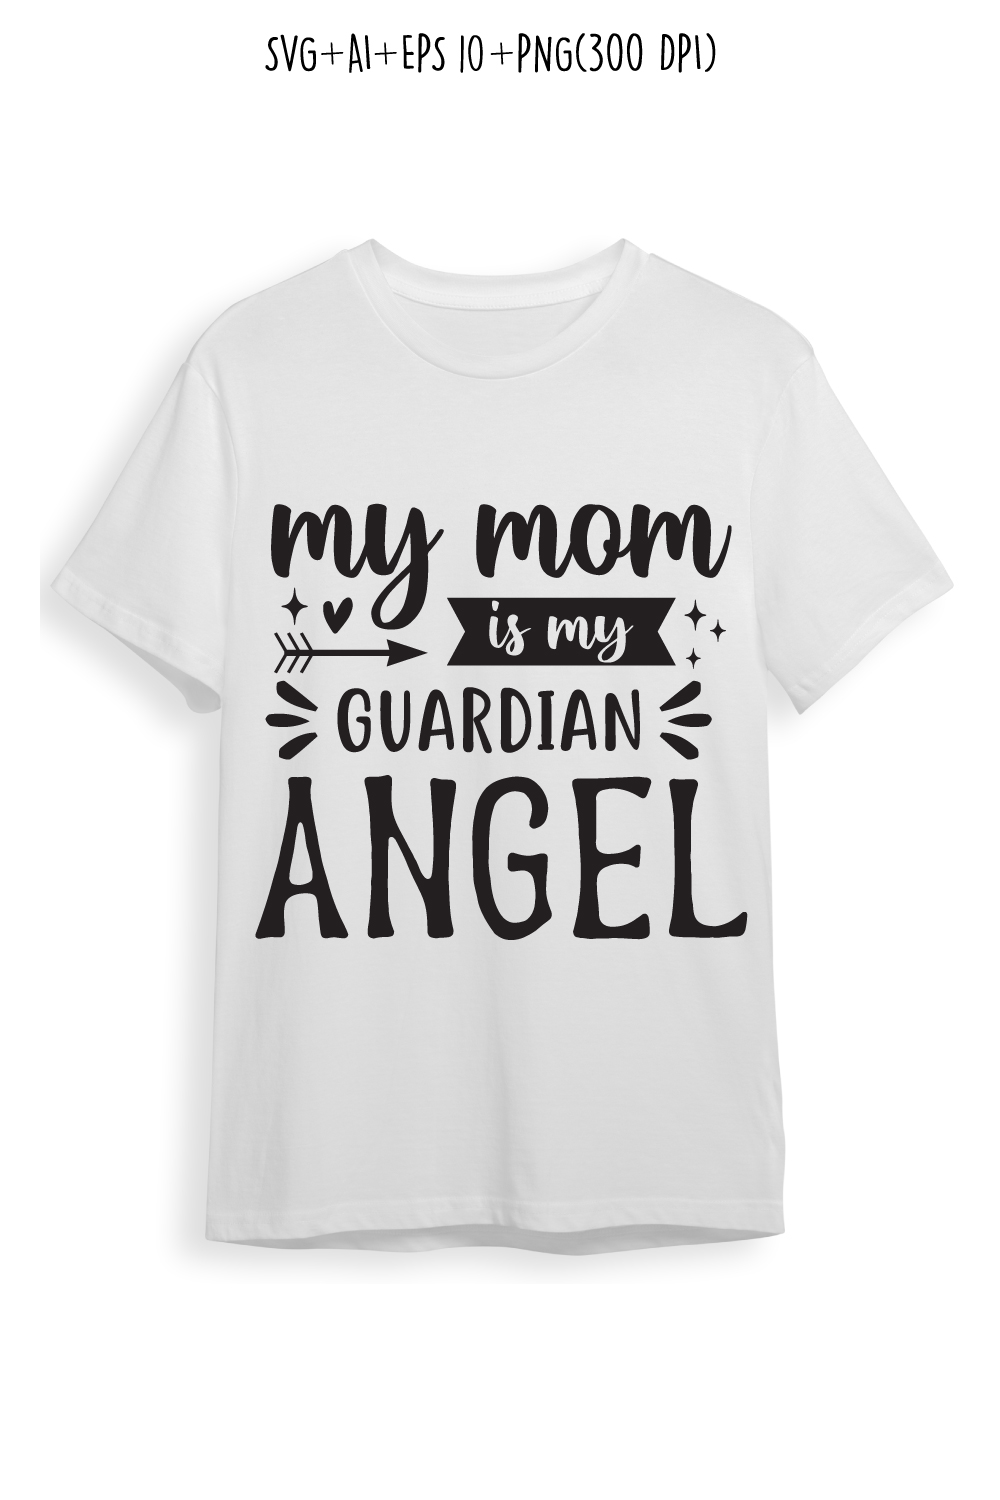 My Mom is My Guardian Angel, mothers day quotes mom svg design for t-shirts, cards, frame artwork, phone cases, bags, mugs, stickers, tumblers, print, etc pinterest preview image.